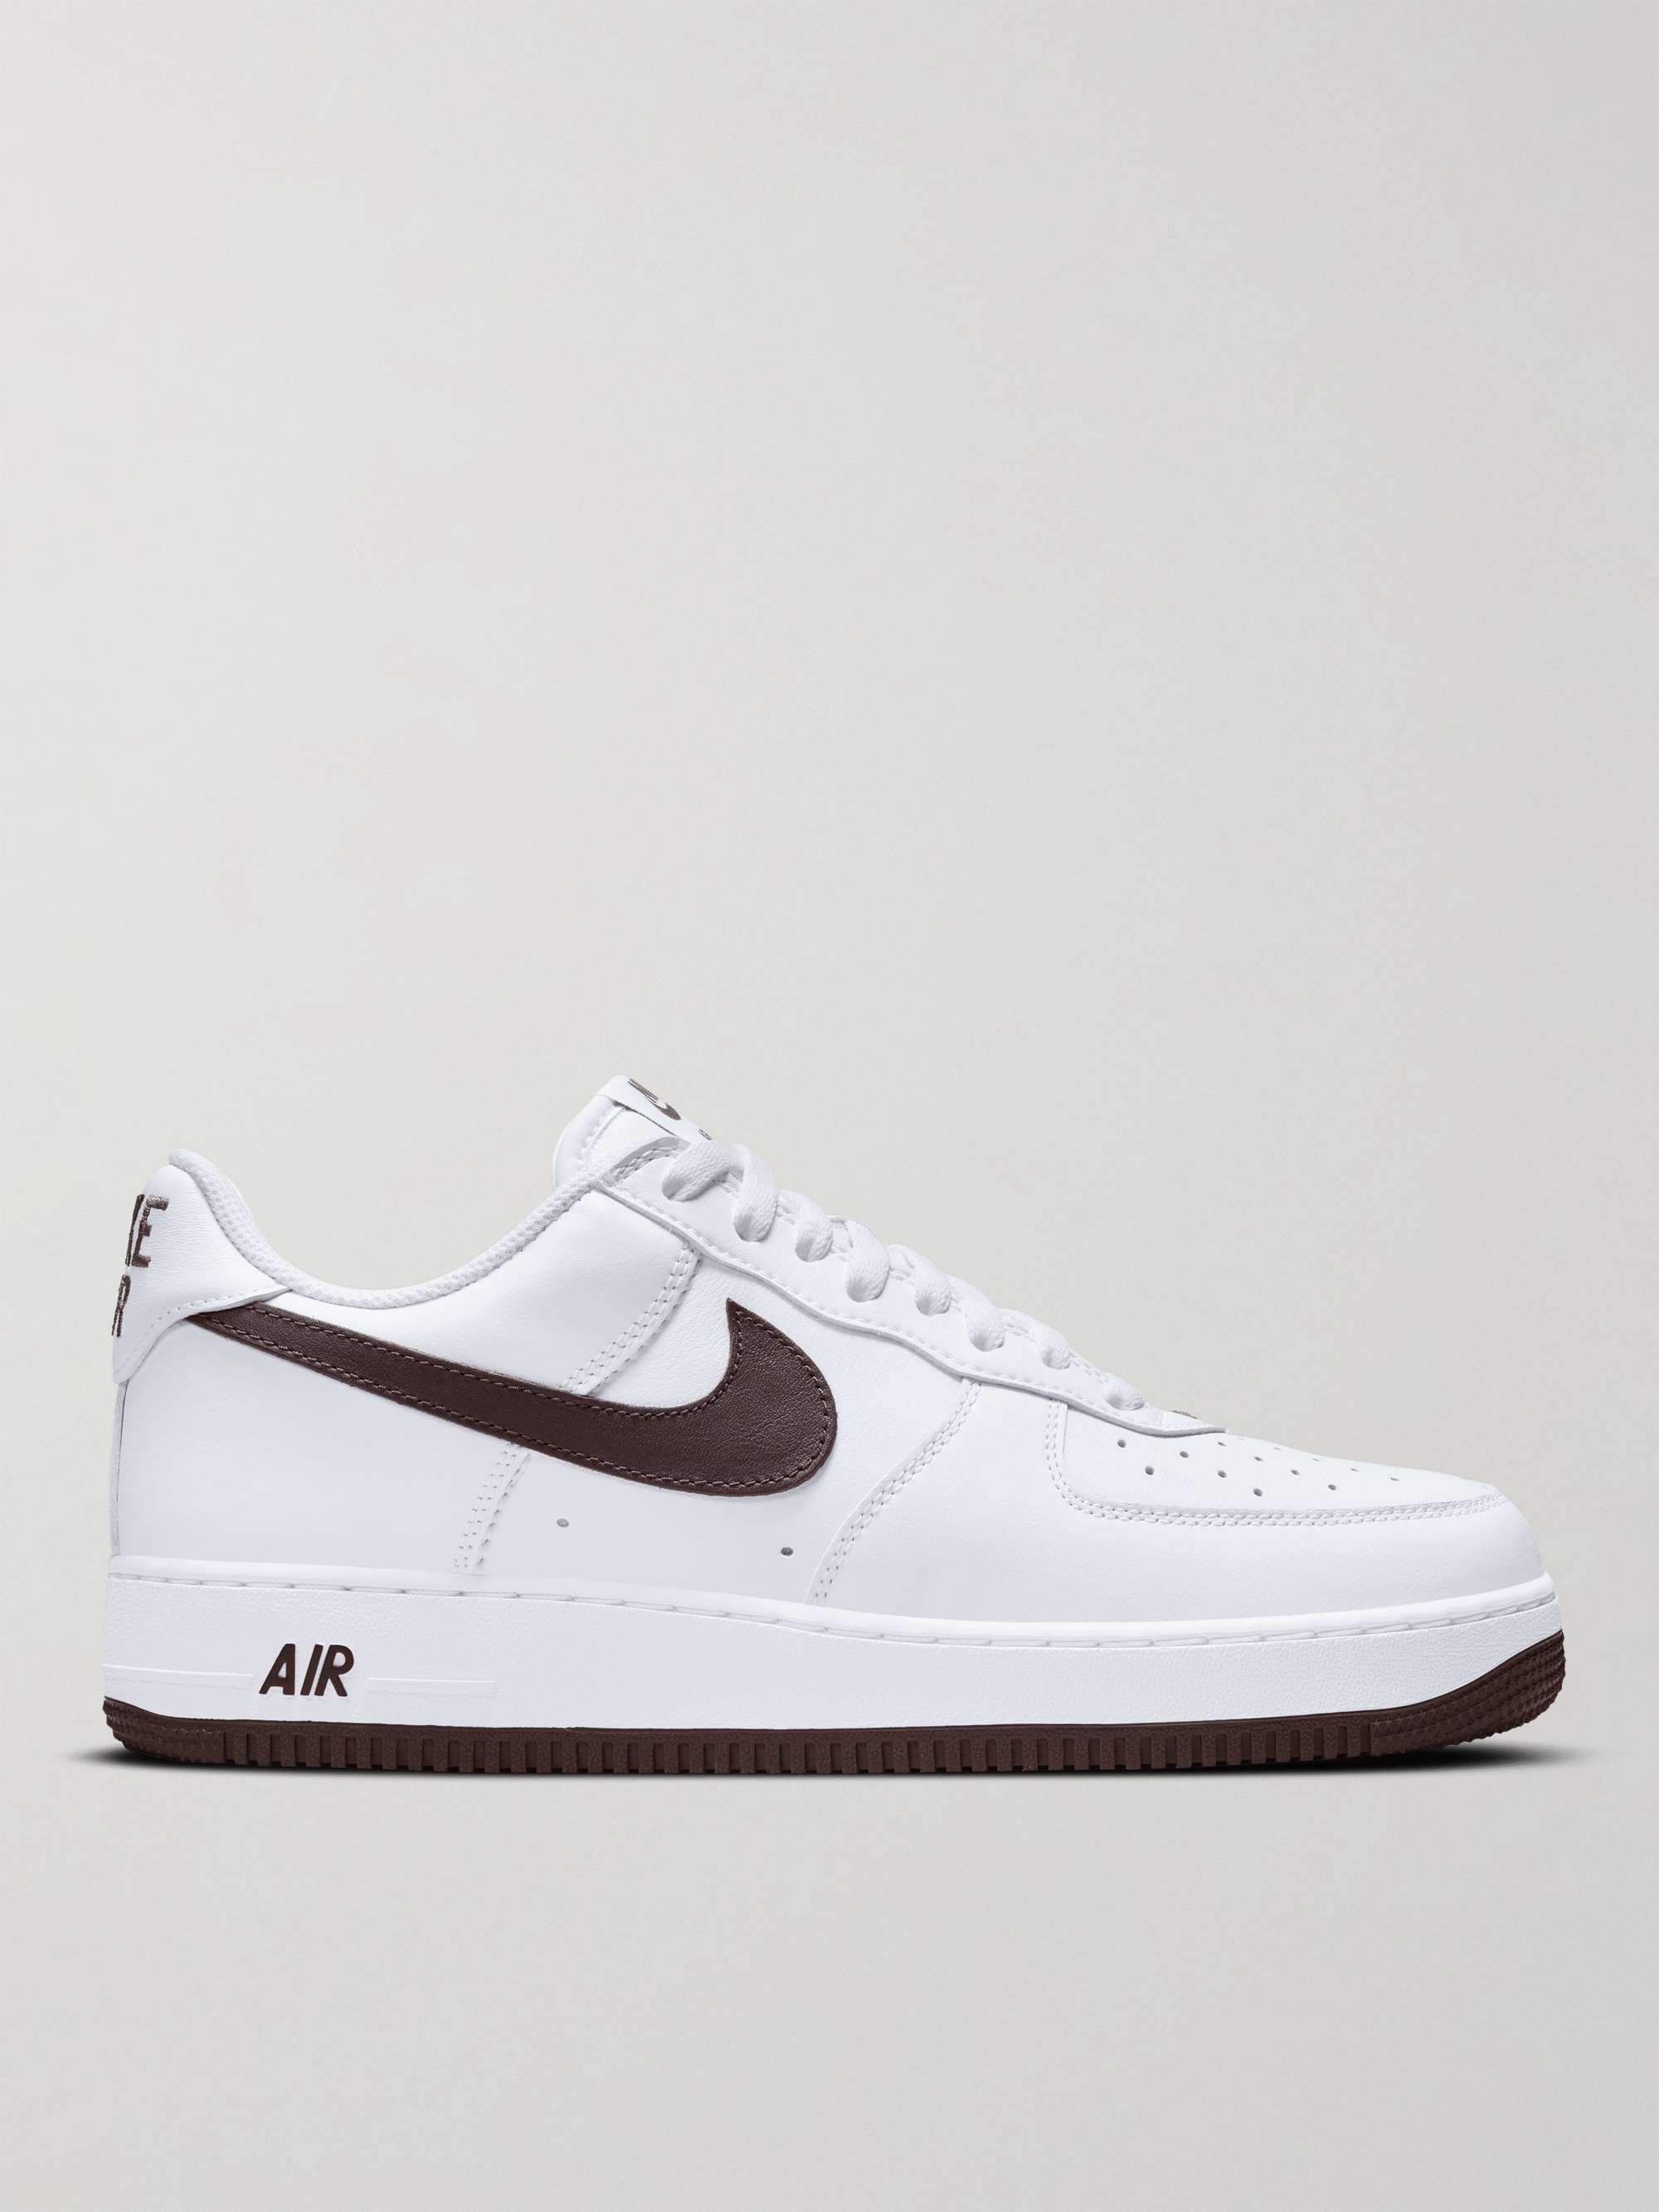 White Air Force 1 Low Retro Leather Sneakers | NIKE | MR PORTER